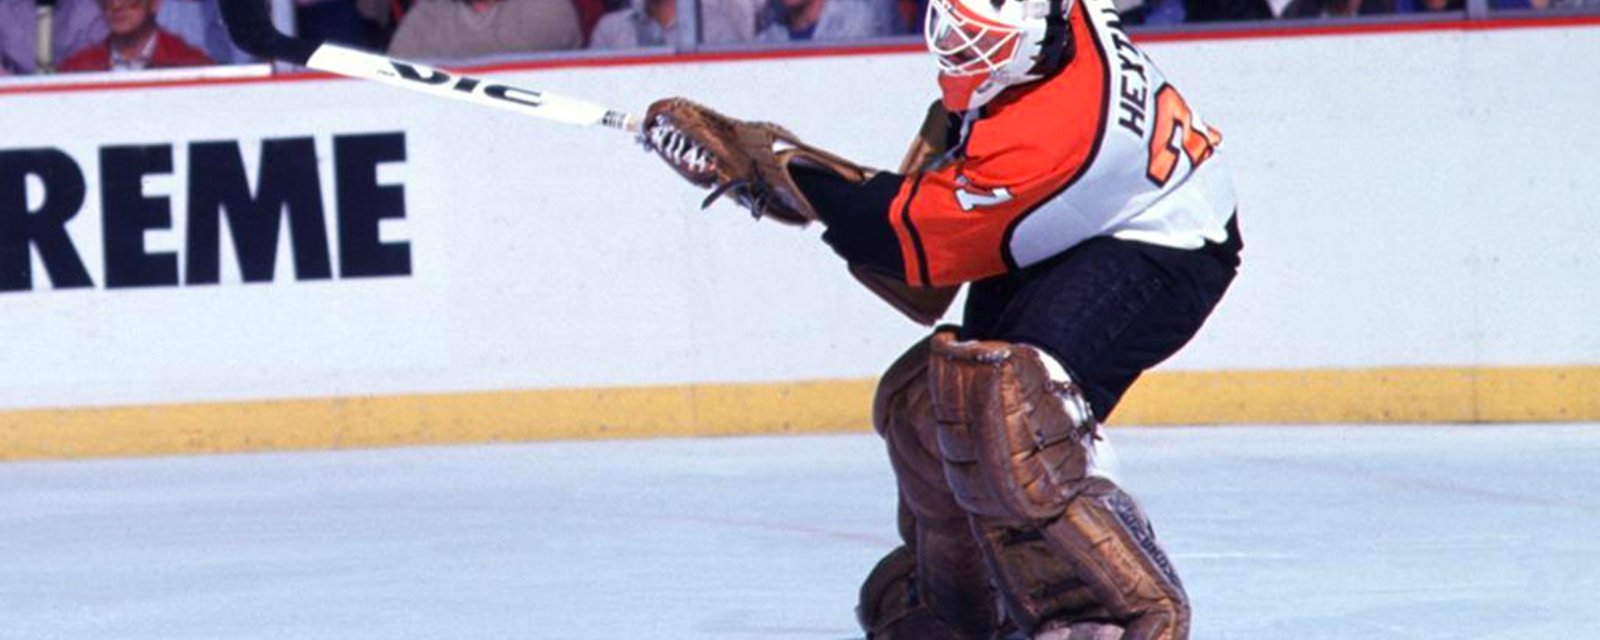 Throwback: Hextall shoots and scores!